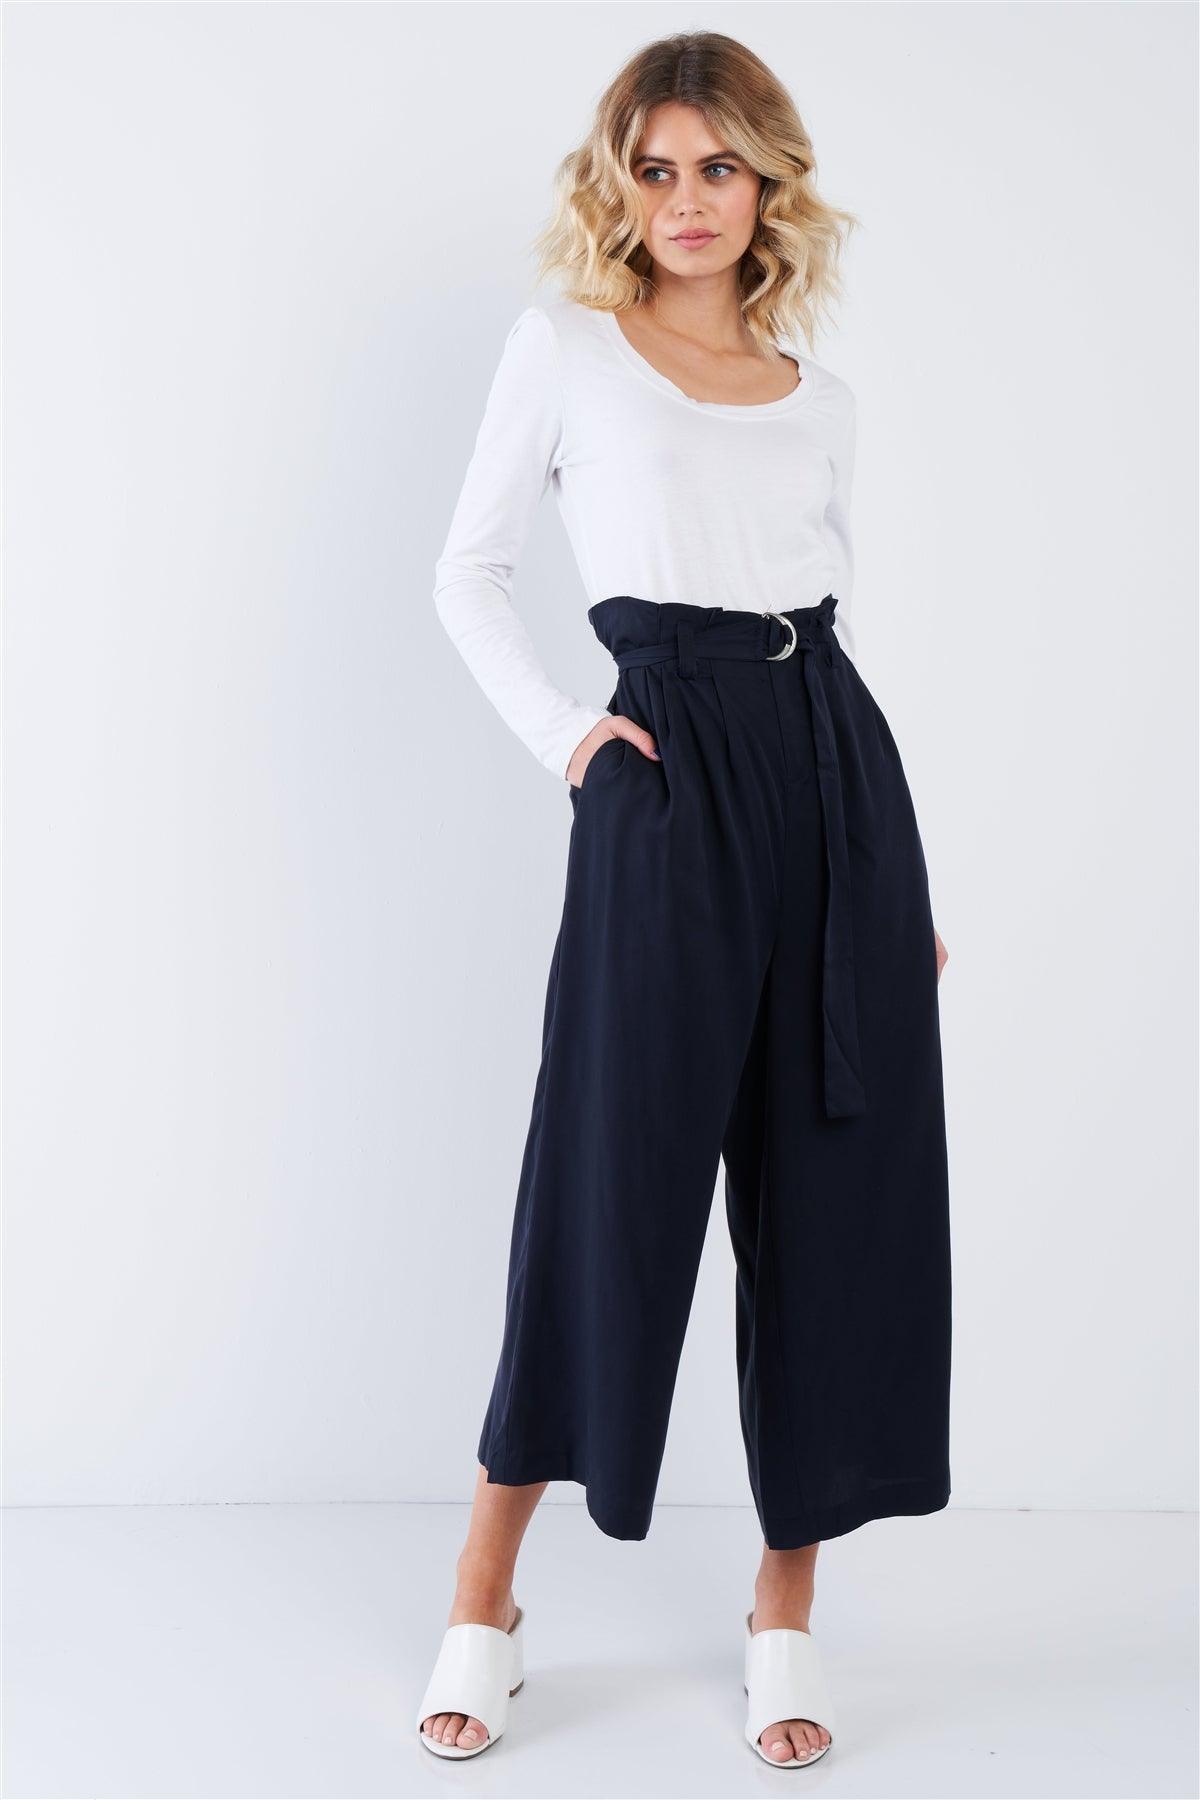 Navy High Waisted Wide Leg Office Chic Gaucho Pants /2-2-1